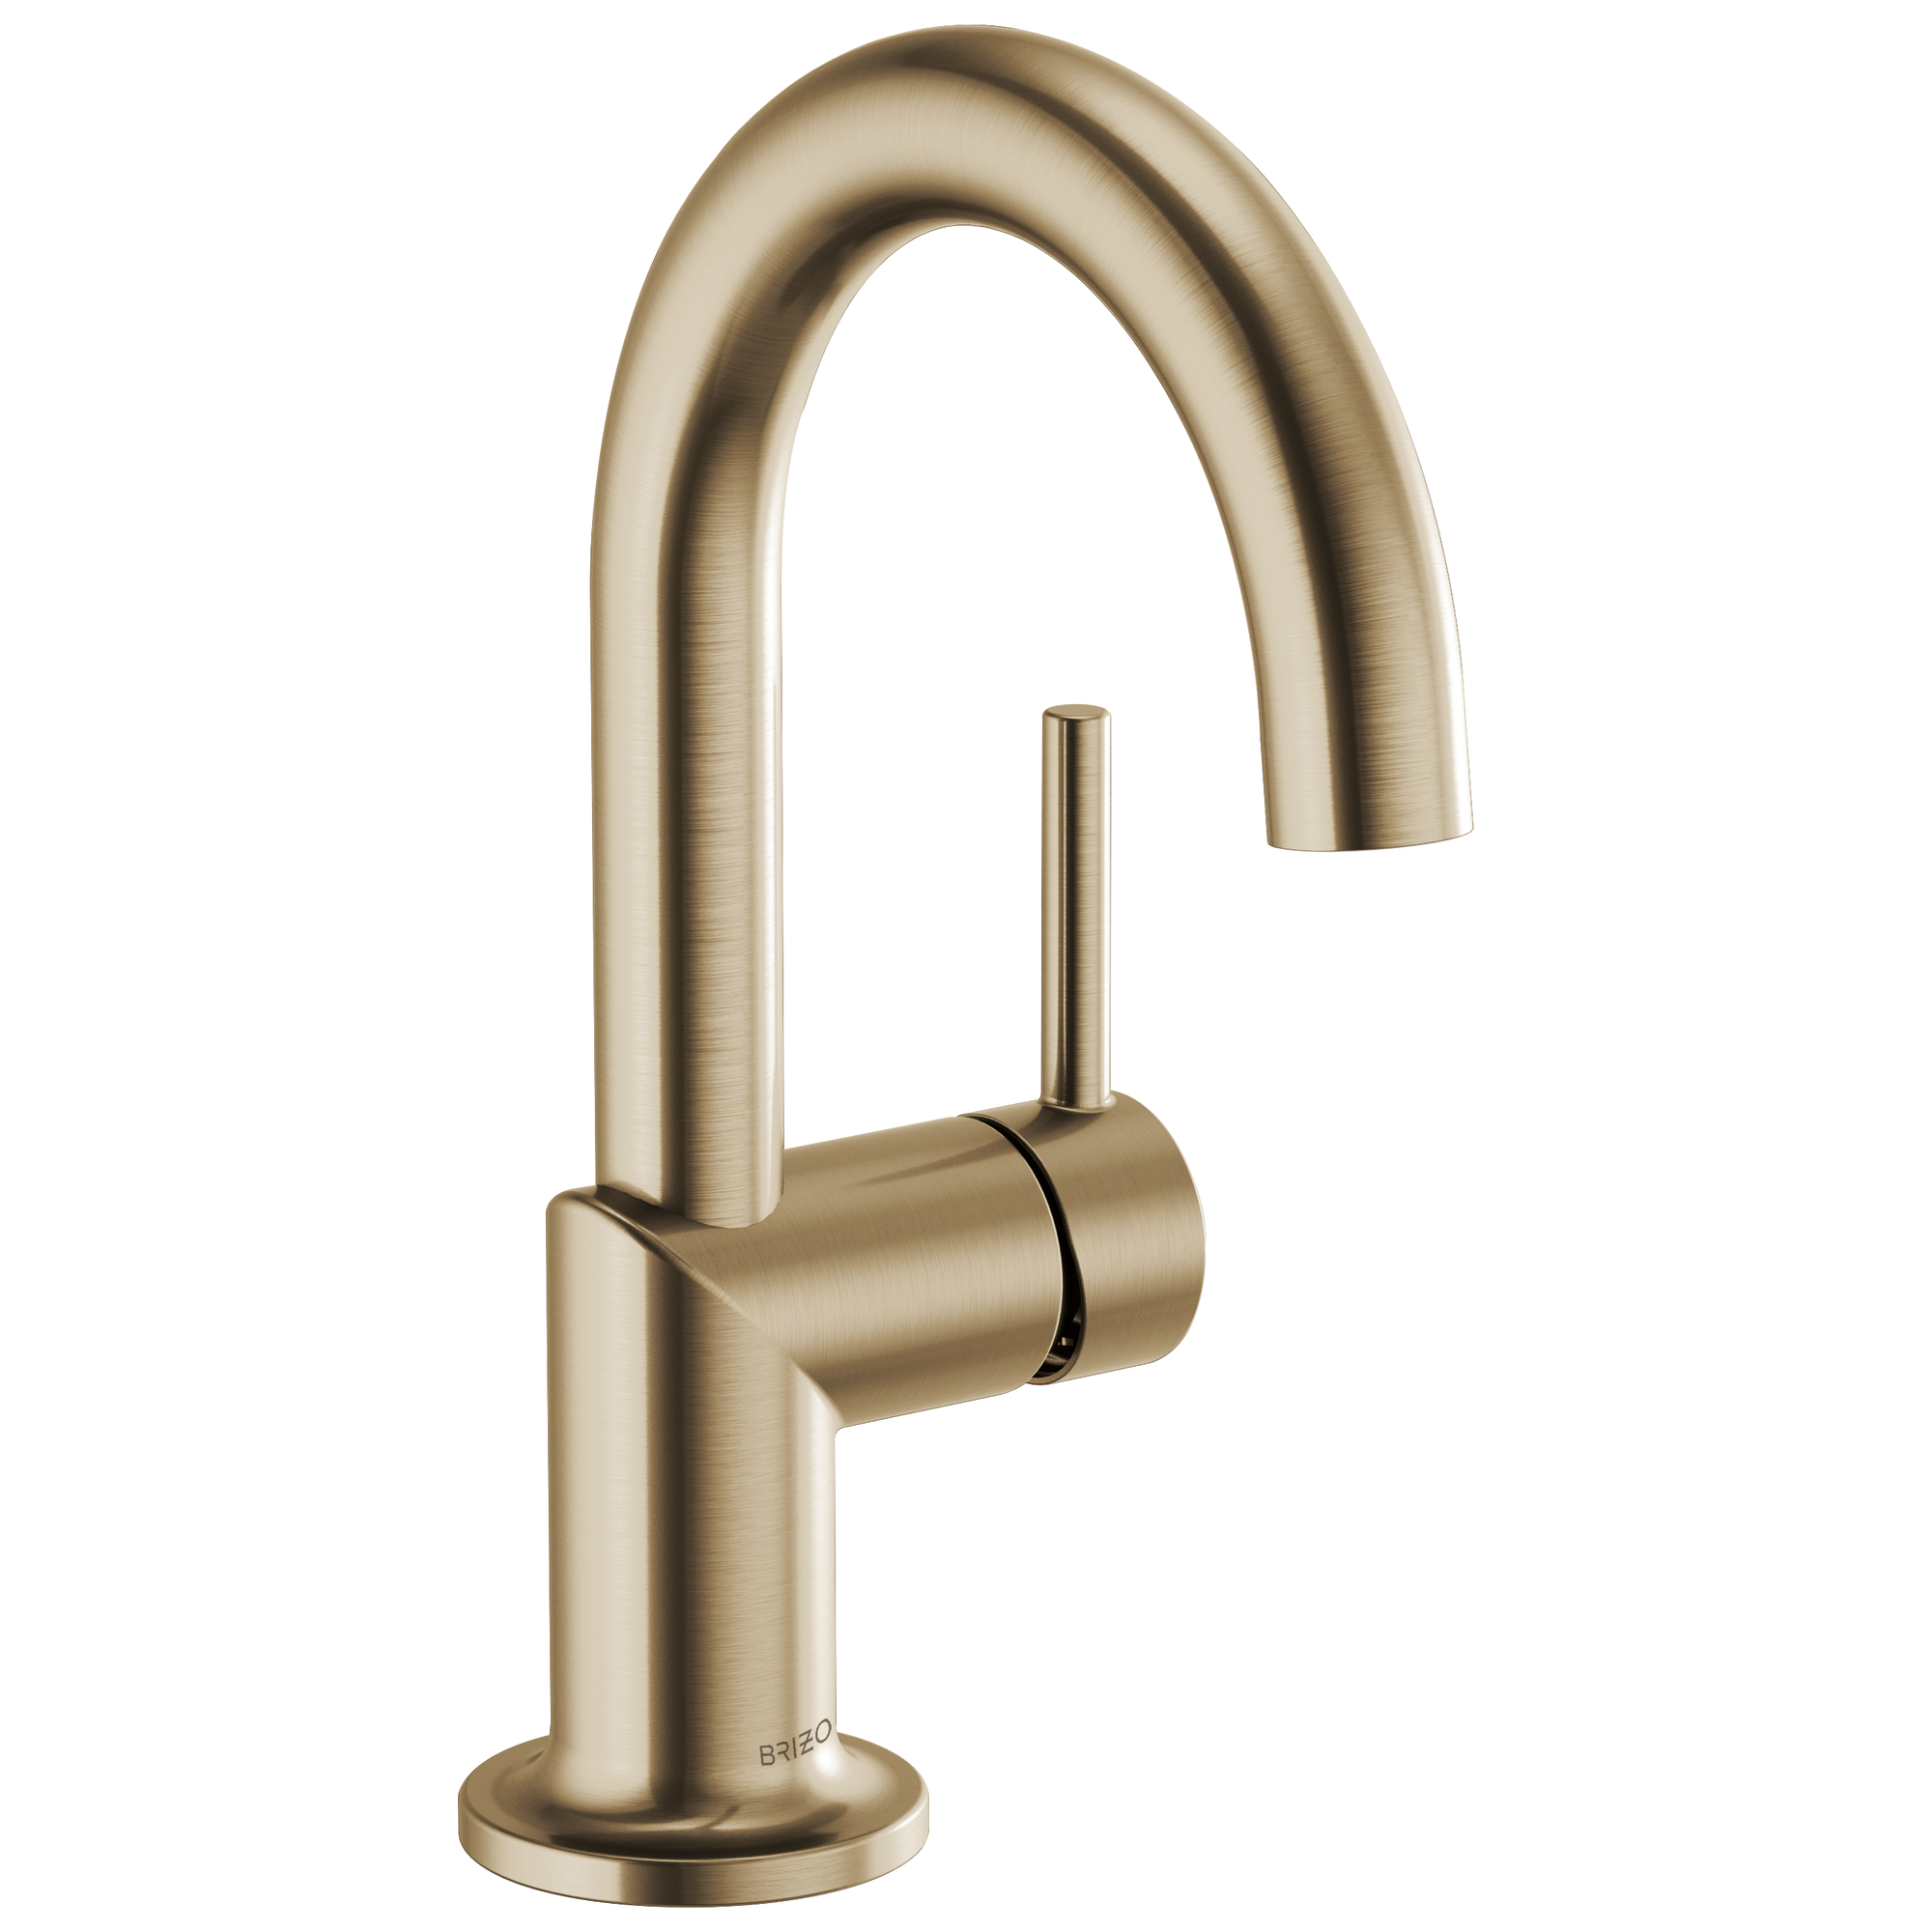 Brizo 65175lf Gl Eco Lavatory Faucet Odin 1 2 Gpm 5 1 2 In H Spout 1 Handles 1 Faucet Holes Luxe Gold Function Traditional First Supply